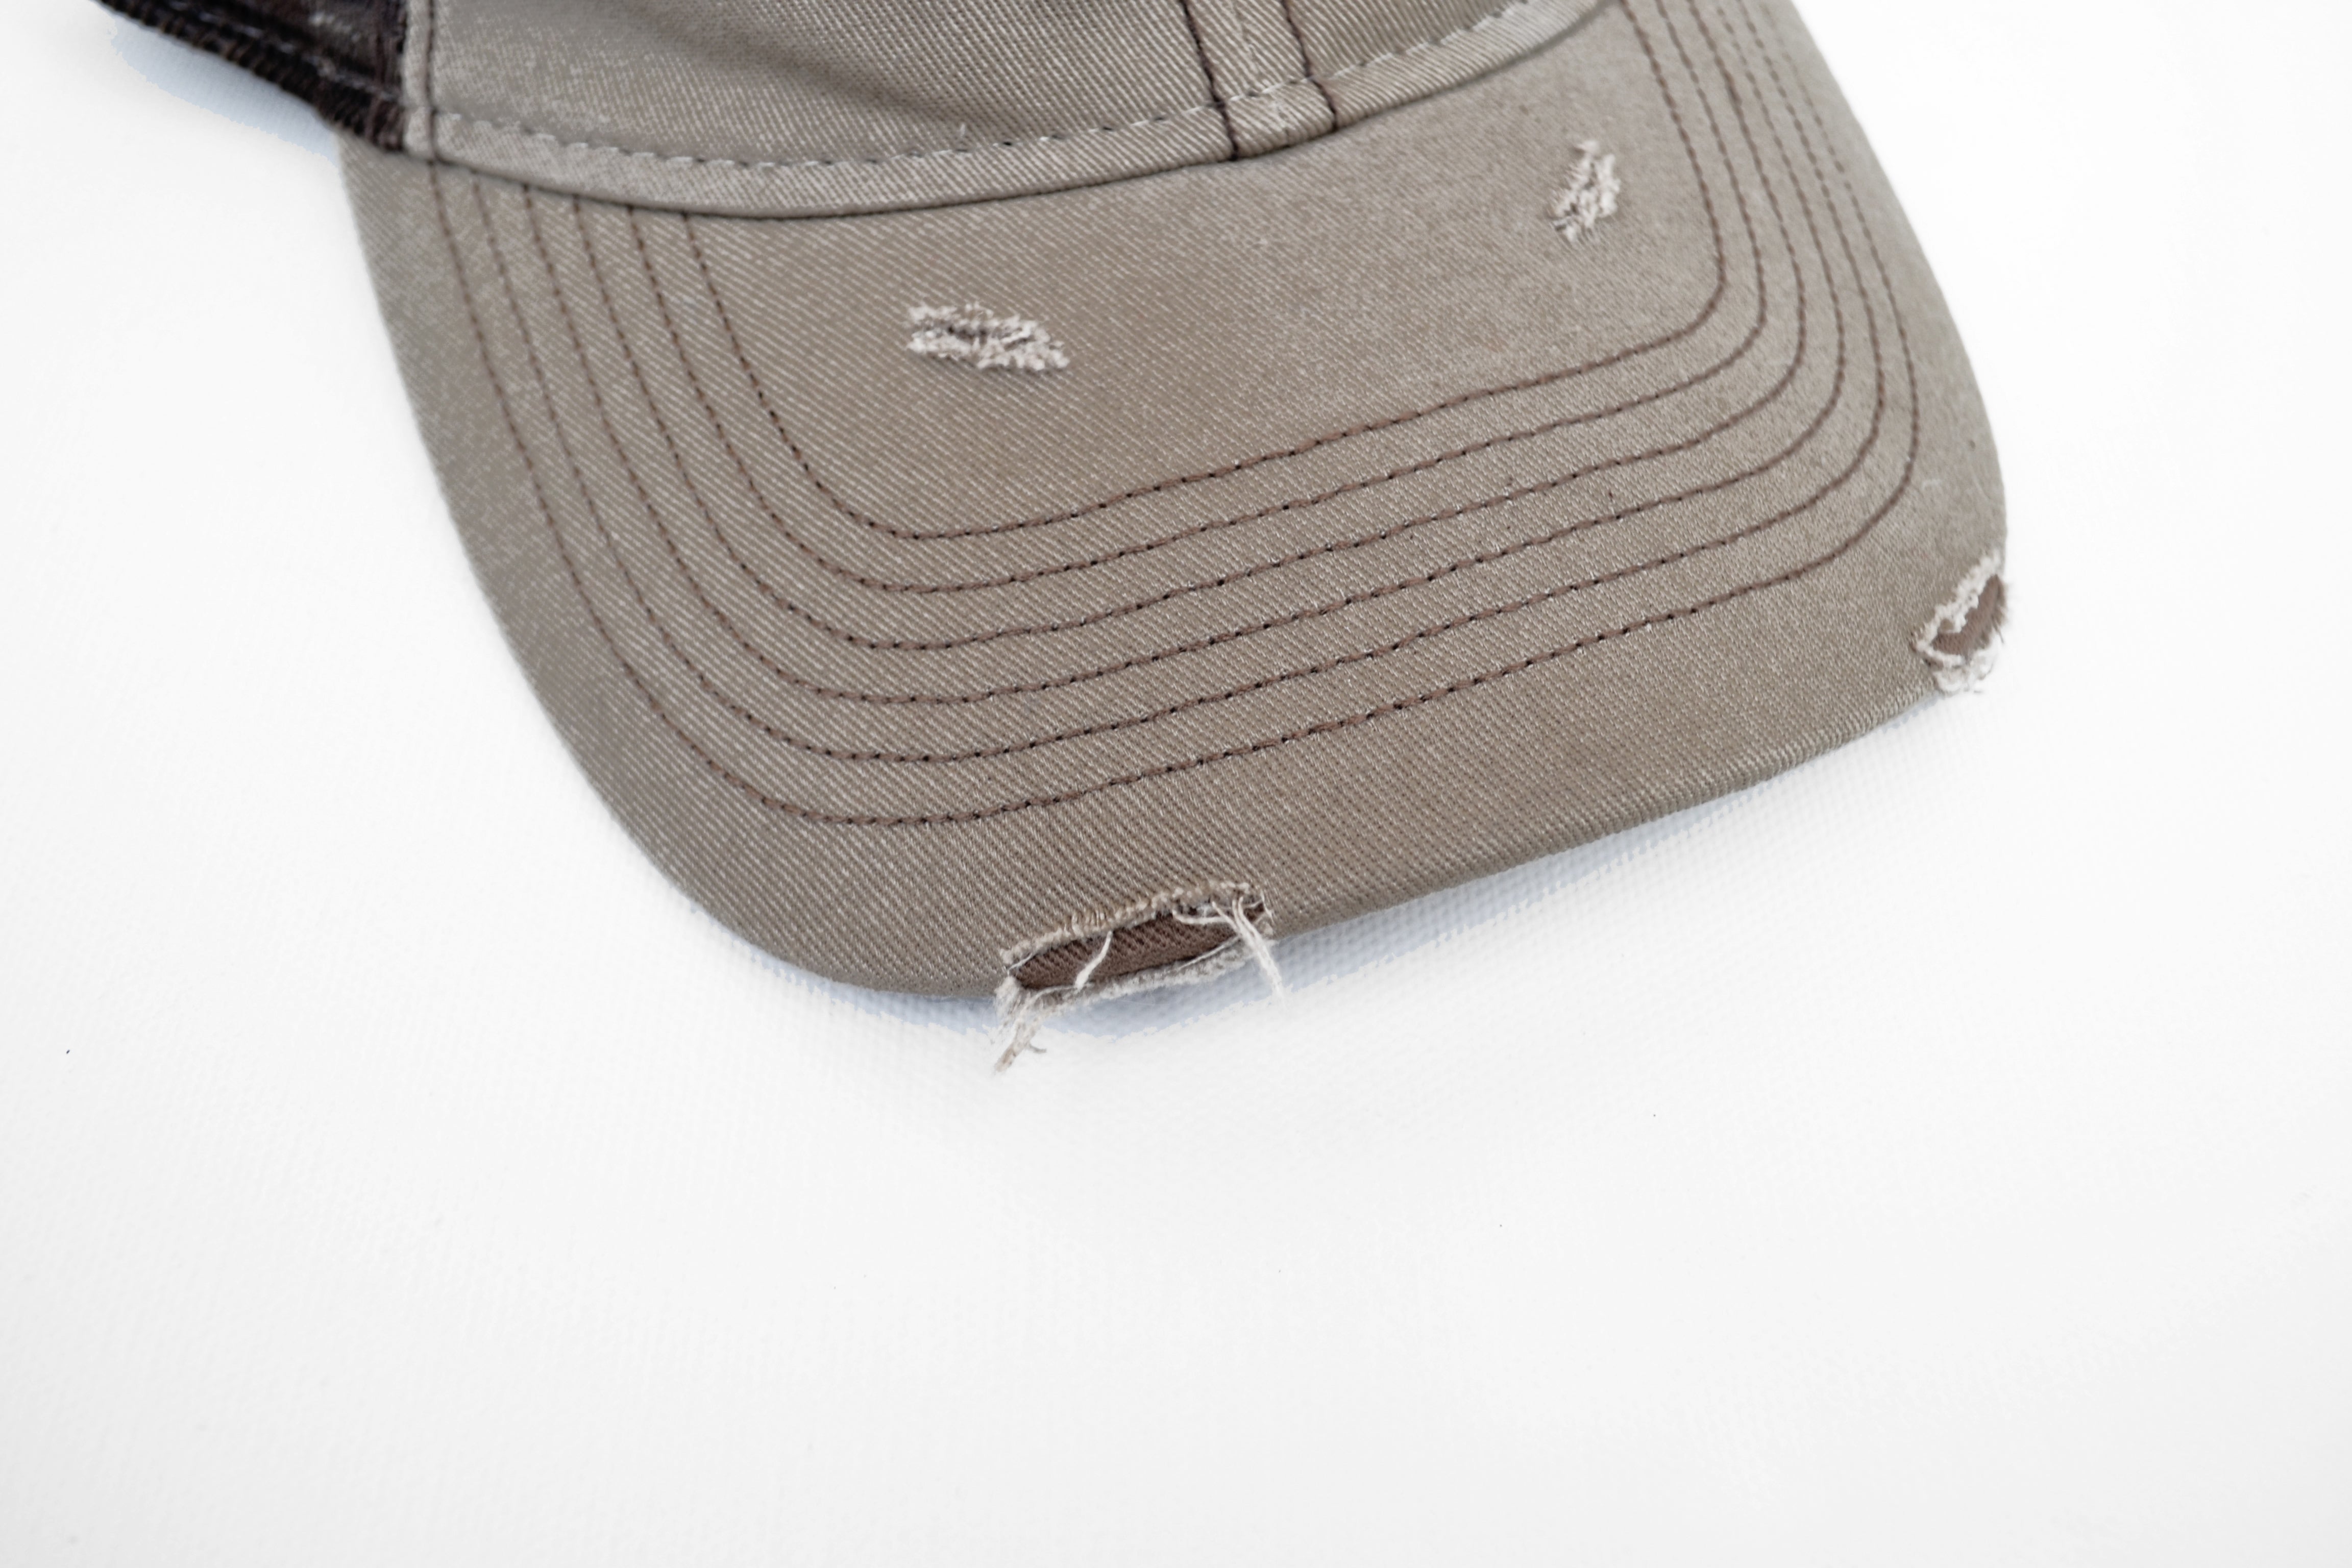 Of These Mountains Dirty Wash Trucker Hat